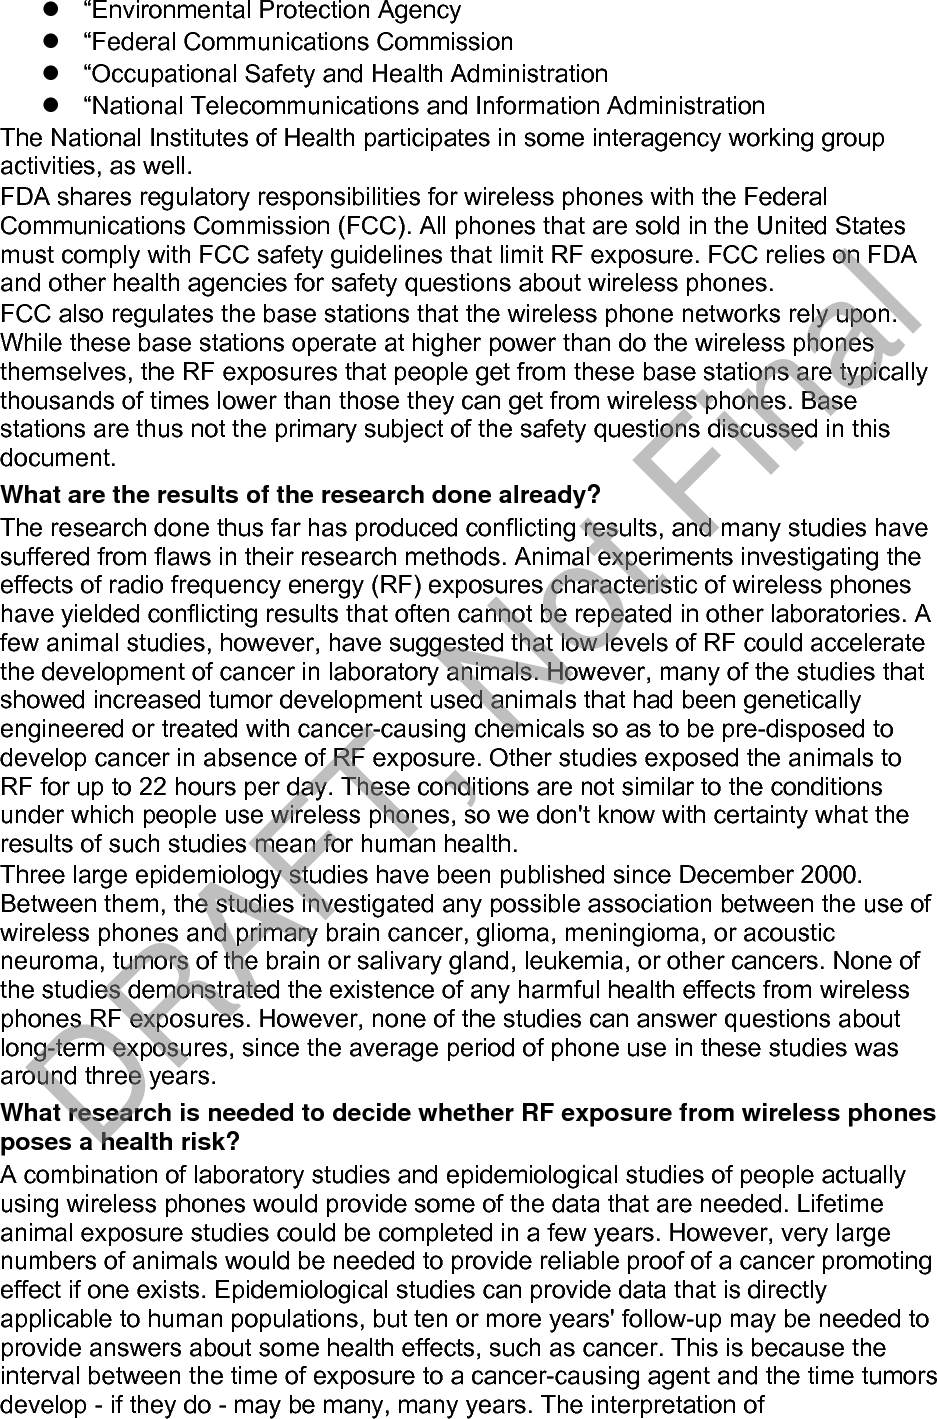 epidemiological studies is hampered by difficulties in measuring actual RF exposure during day-to-day use of wireless phones. Many factors affect this measurement, such as the angle at which the phone is held, or which model of phone is used. What is FDA doing to find out more about the possible health effects of wireless phone RF? FDA is working with the U.S. National Toxicology Program and with groups of investigators around the world to ensure that high priority animal studies are conducted to address important questions about the effects of exposure to radio frequency energy (RF). FDA has been a leading participant in the World Health Organization international Electromagnetic Fields (EMF) Project since its inception in 1996. An influential result of this work has been the development of a detailed agenda of research needs that has driven the establishment of new research programs around the world. The Project has also helped develop a series of public information documents on EMF issues. FDA and Cellular Telecommunications &amp; Internet Association (CTIA) have a formal Cooperative Research and Development Agreement (CRADA) to do research on wireless phone safety. FDA provides the scientific oversight, obtaining input from experts in government, industry, and academic organizations. CTIA-funded research is conducted through contracts to independent investigators. The initial research will include both laboratory studies and studies of wireless phone users. The CRADA will also include a broad assessment of additional research needs in the context of the latest research developments around the world. What steps can I take to reduce my exposure to radio frequency energy from my wireless phone? If there is a risk from these products - and at this point we do not know that there is - it is probably very small. But if you are concerned about avoiding even potential risks, you can take a few simple steps to minimize your exposure to radio frequency energy (RF). Since time is a key factor in how much exposure a person receives, reducing the amount of time spent using a wireless phone will reduce RF exposure. “If you must conduct extended conversations by wireless phone every day,you could place more distance between your body and the source of the RF,since the exposure level drops off dramatically with distance. For example,you could use a headset and carry the wireless phone away from your body.Again, the scientific data do not demonstrate that wireless phones are harmful. But if you are concerned about the RF exposure from these products, you can use measures like those described above to reduce your RF exposure from wireless phone use. What about children using wireless phones? The scientific evidence does not show a danger to users of wireless phones, including children and teenagers. If you want to take steps to lower exposure to radio frequency energy (RF), the measures described above would apply to children and teenagers using wireless phones. Reducing the time of wireless phone use and increasing the distance between the user and the RF source will reduce RF exposure. Some groups sponsored by other national governments have advised that children be discouraged from using wireless phones at all. For example, the government in DRAFT, Not Final